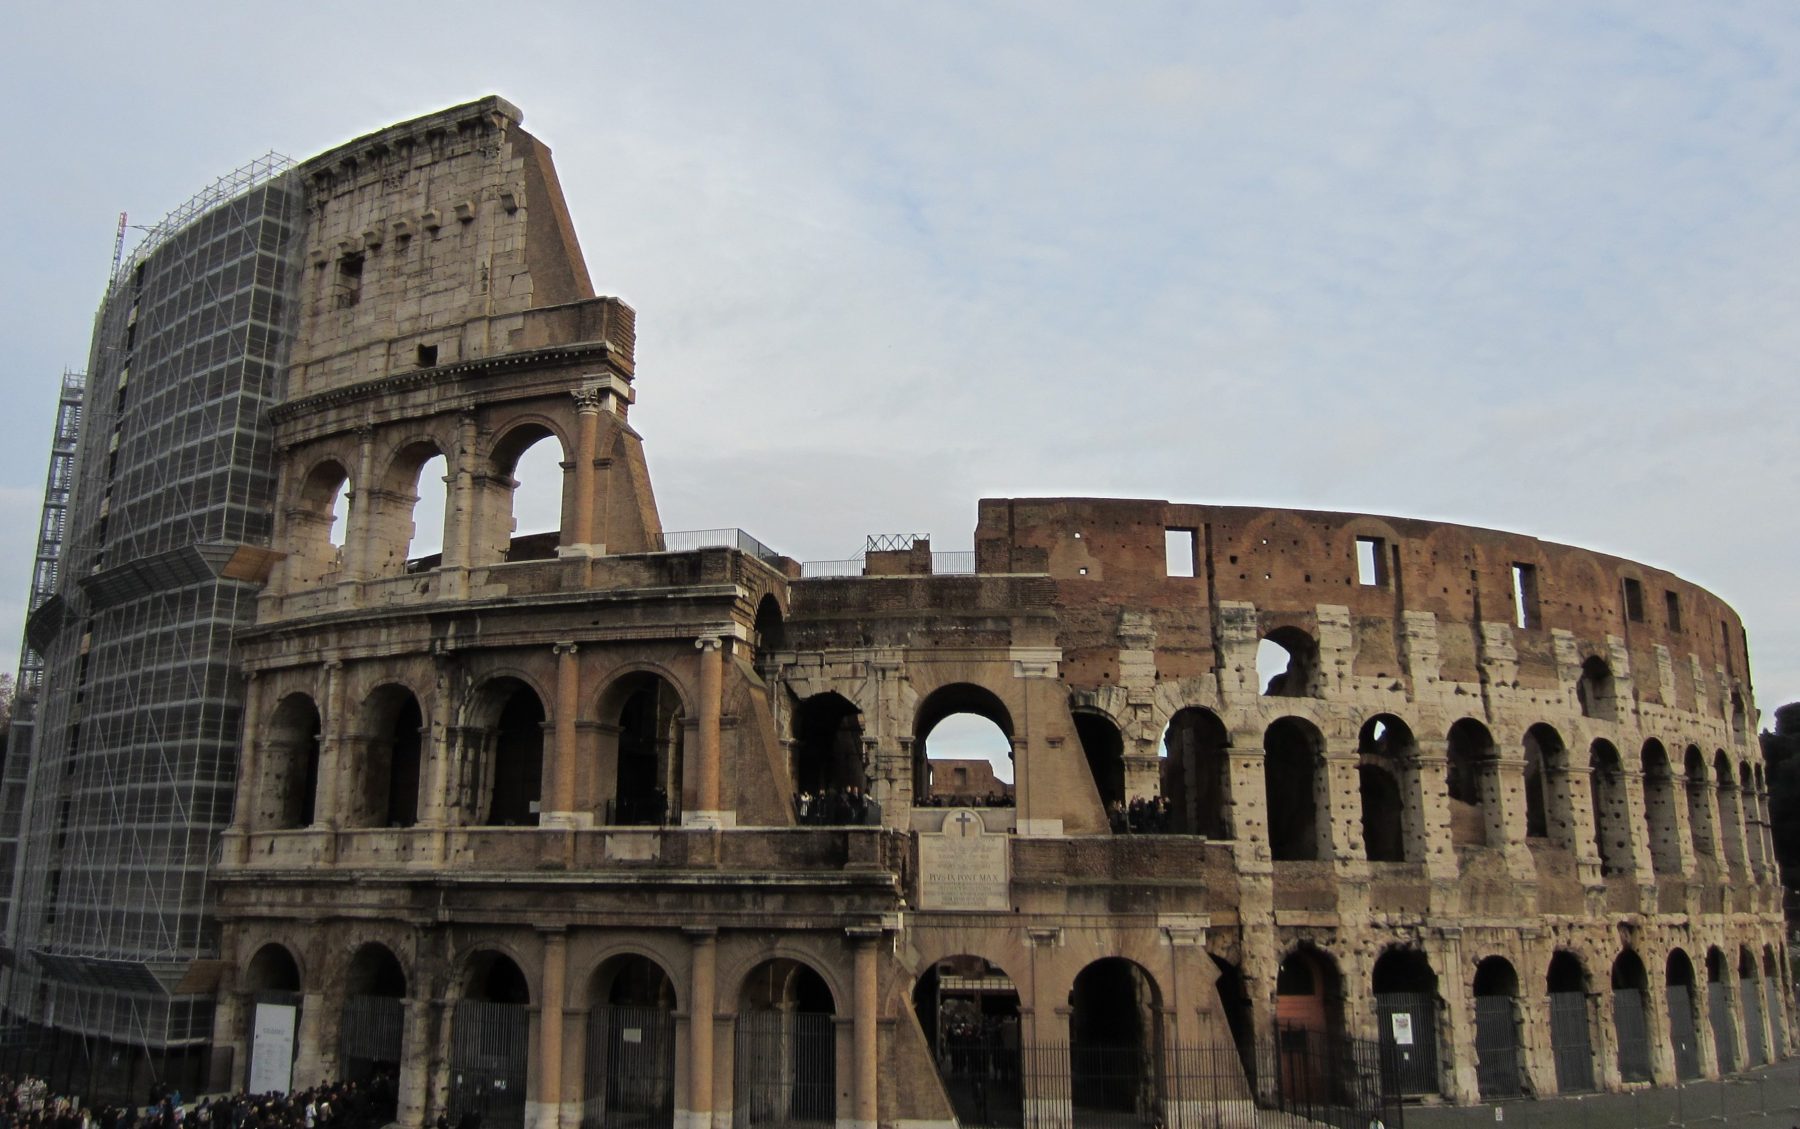 Rome, Colosseum From Outside